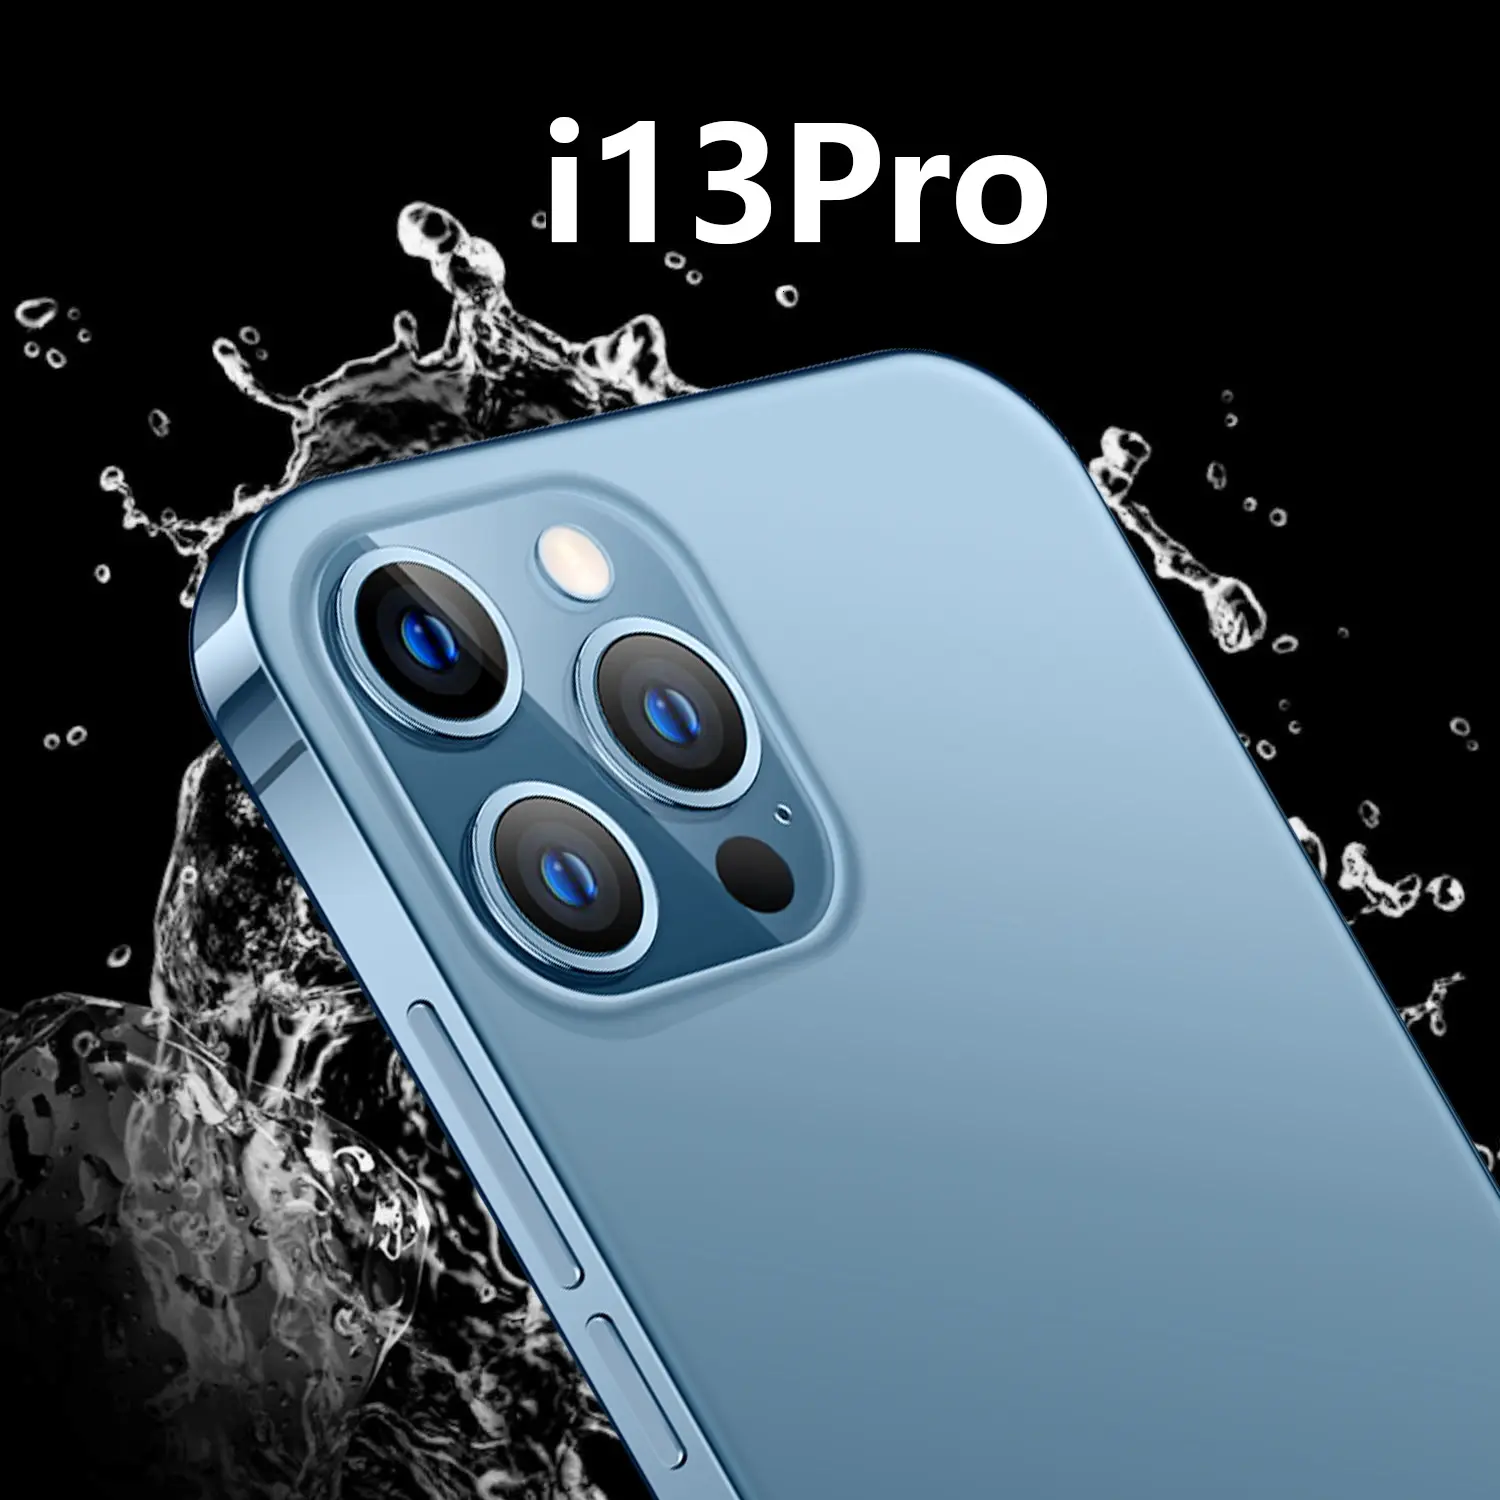 2022 New i13 pro max 6.7-inch Global version original smartphone 16GB+512GB long standby time Android10.0 mobile phone